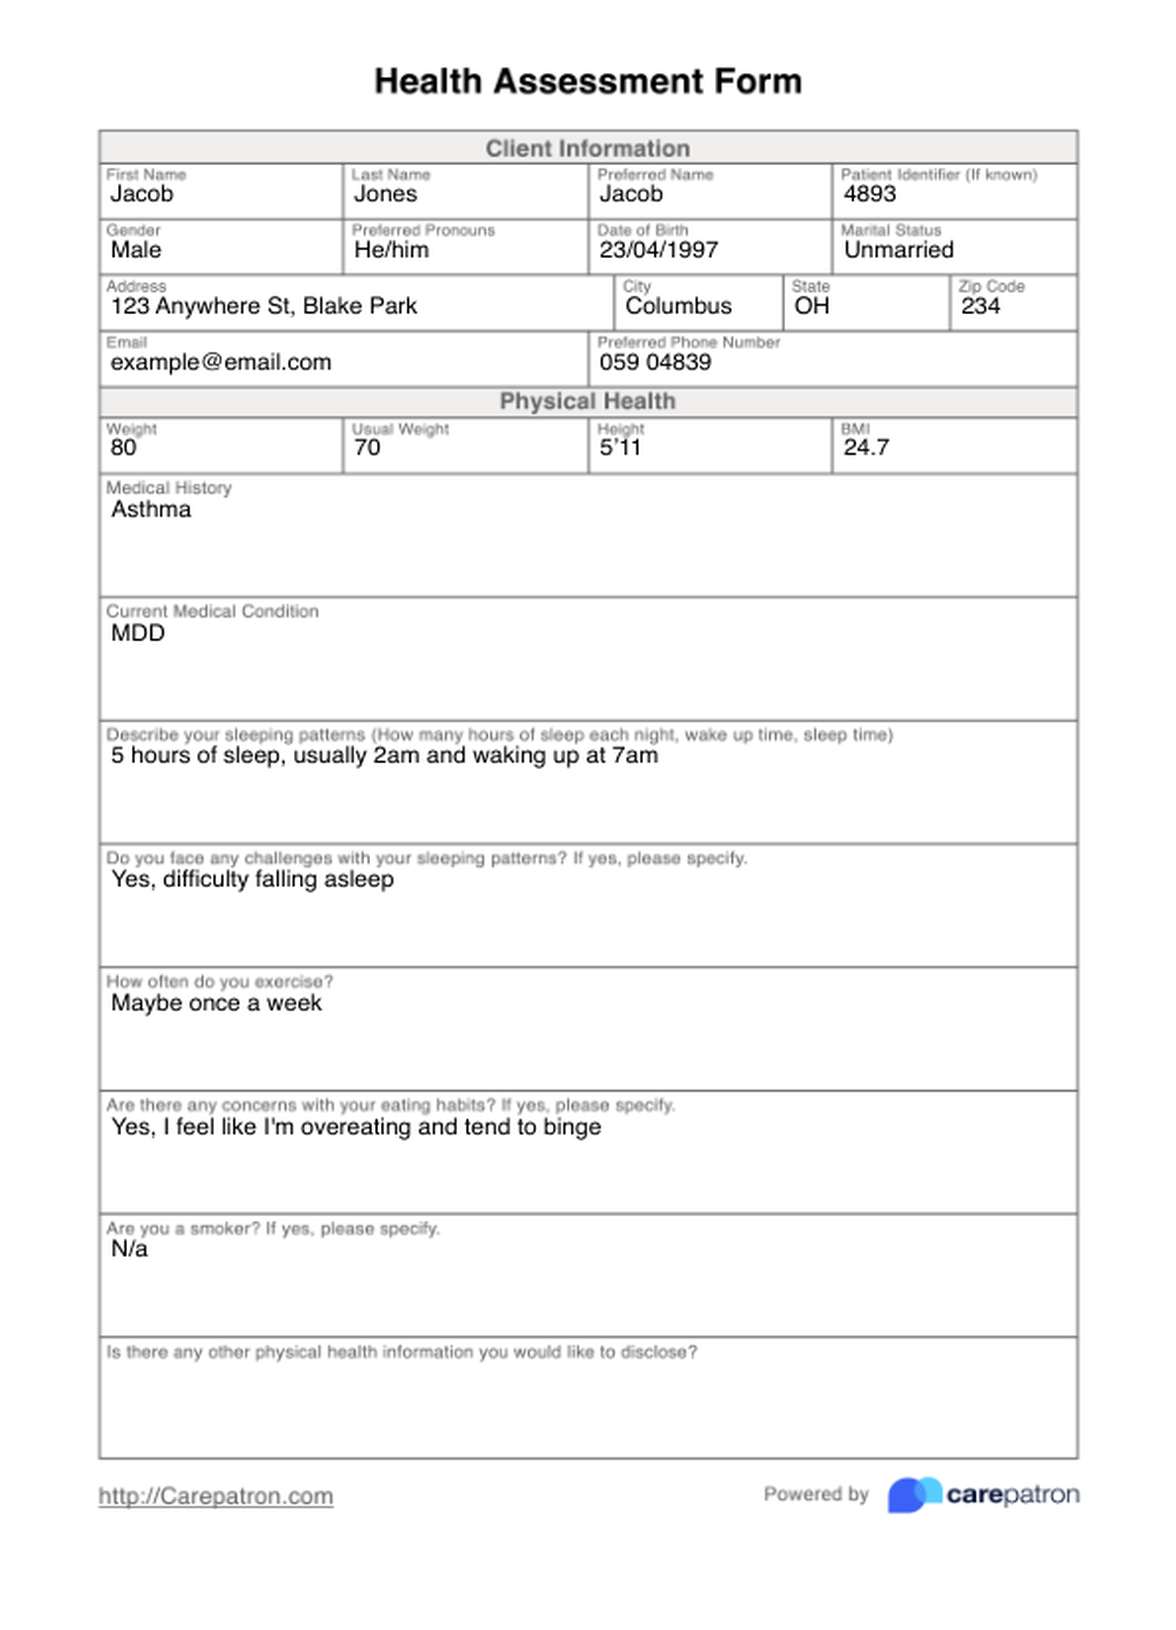 Health Assessment Form PDF Example